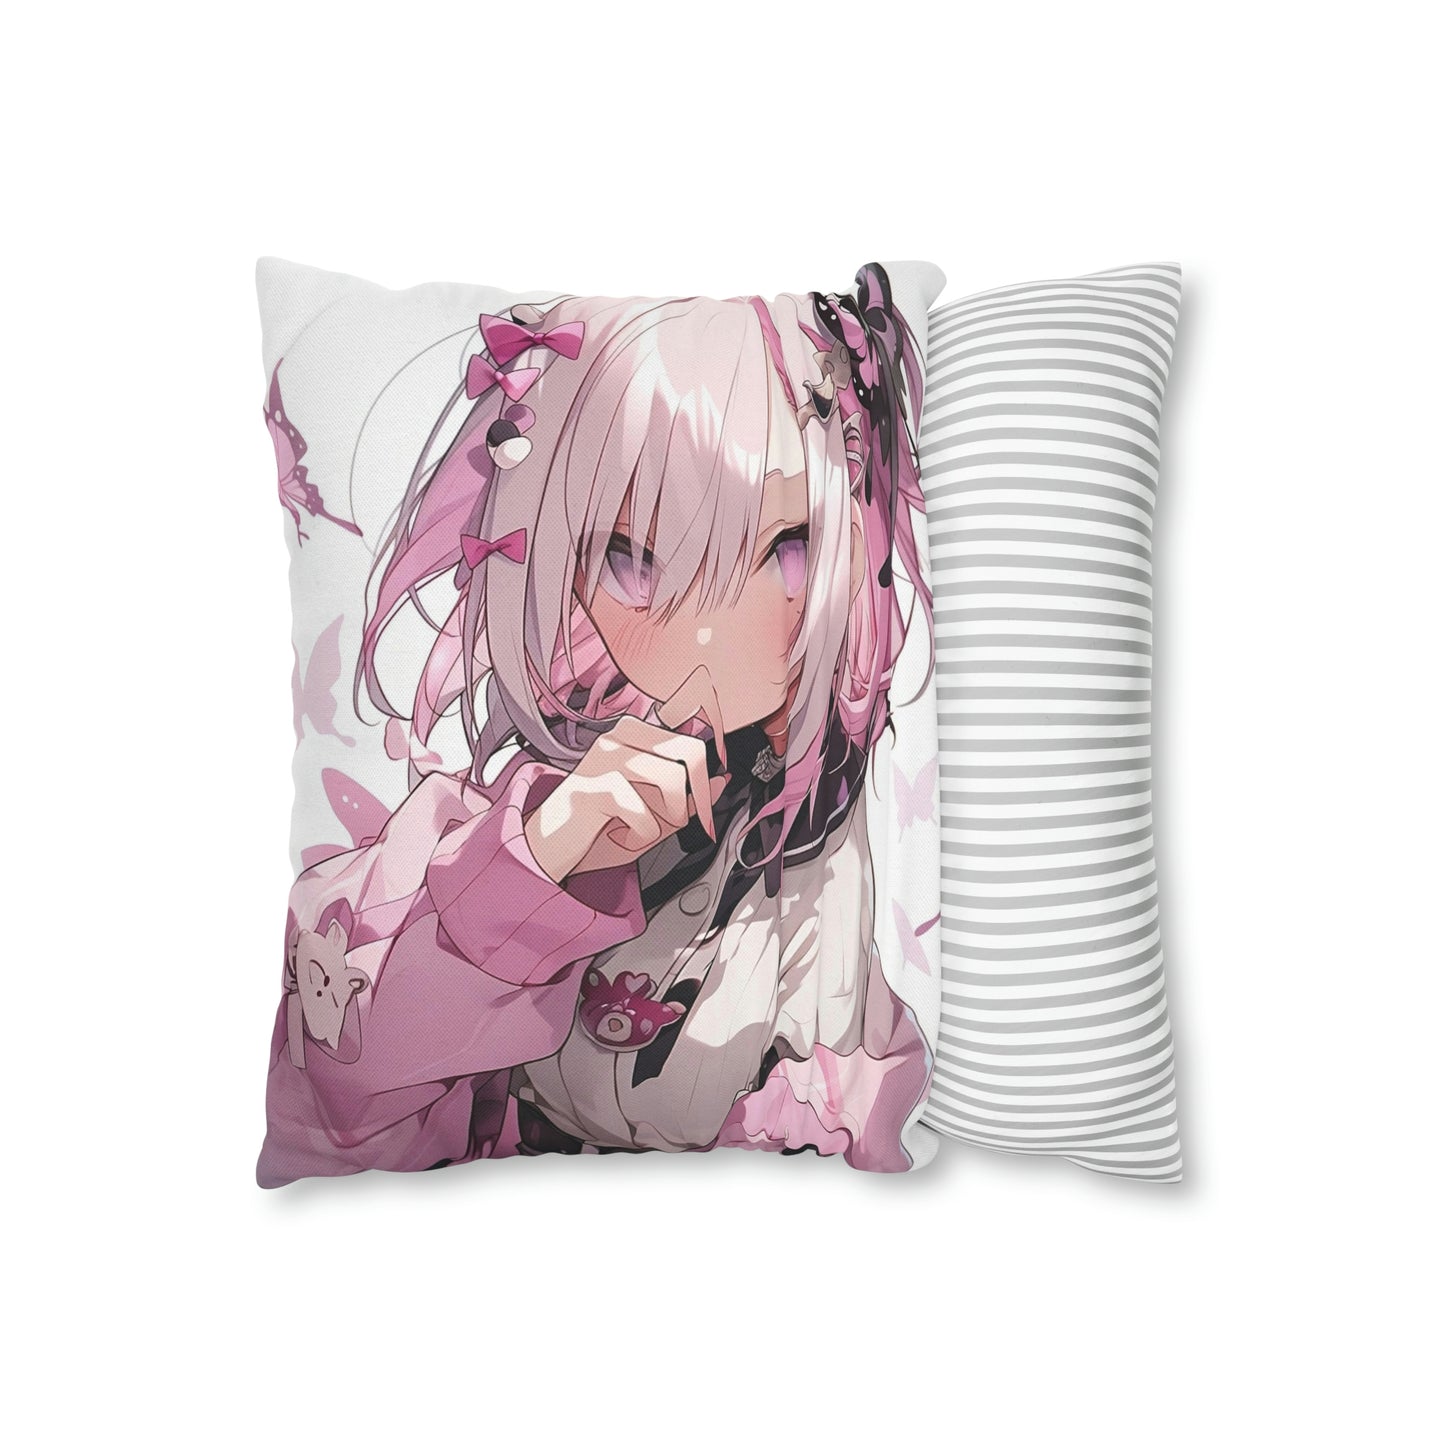 Anime Girl Pillow Case, Pink Square Throw Decorative Cover Room Décor Floor Couch Cushion 20 x 20 Zipper Sofa Starcove Fashion